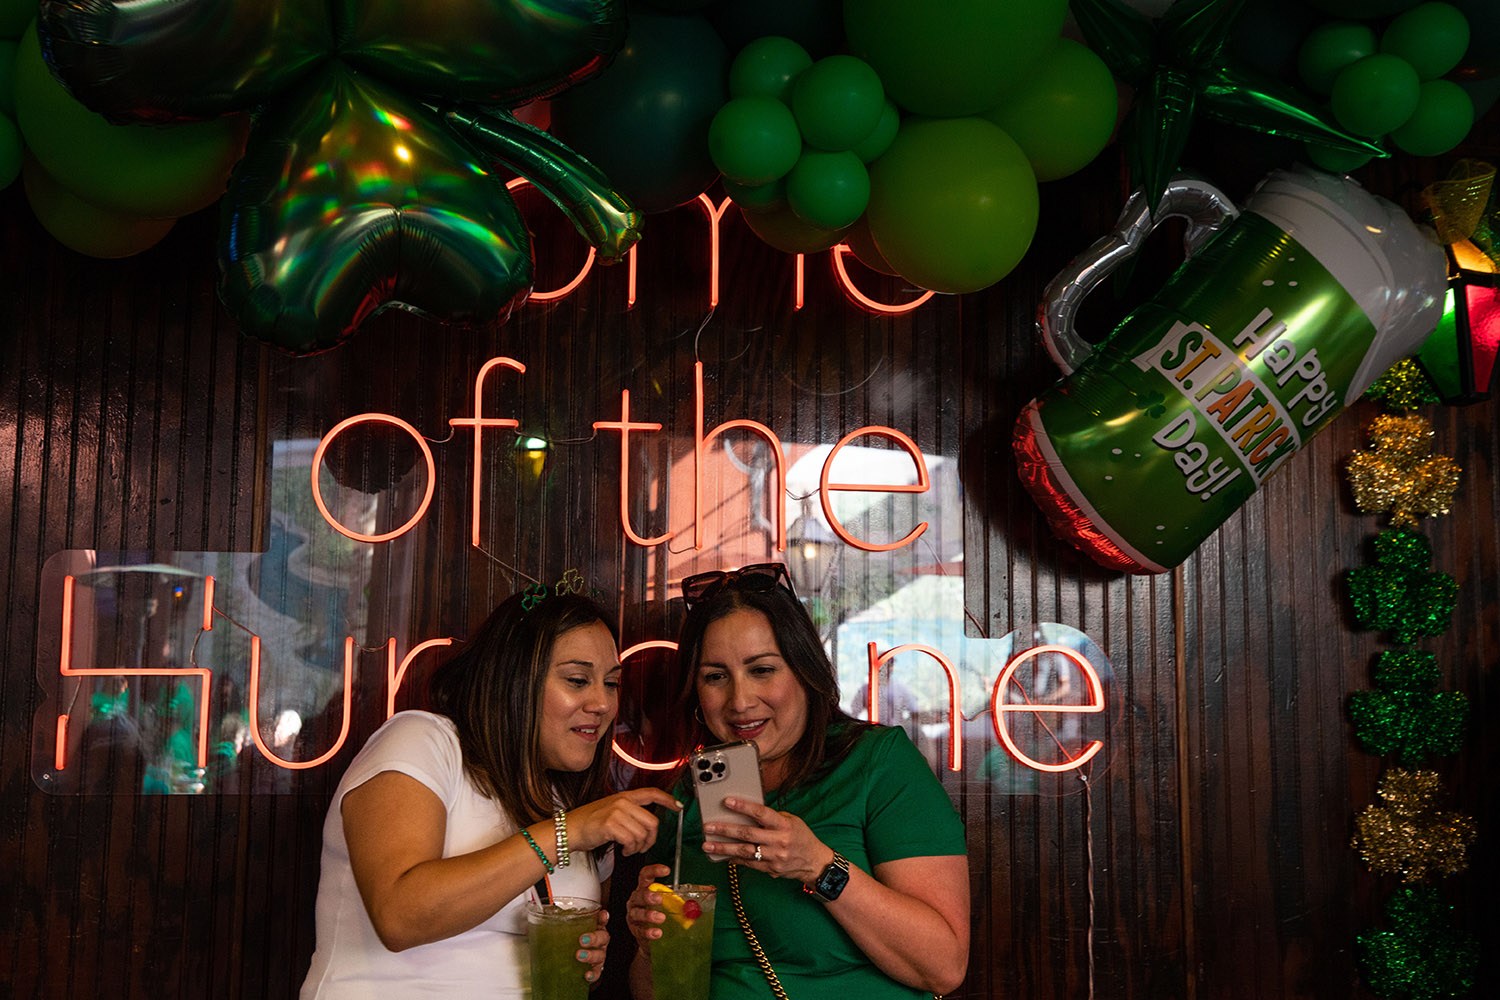 Christina Liserio and Emilia Gomez wait for a table to open up at Pat O’Brien’s in downtown San Antonio, Texas, on Thursday, March 17, 2022. Photo by Kaylee Greenlee Beal | @kgreenleephoto | Heron contributor